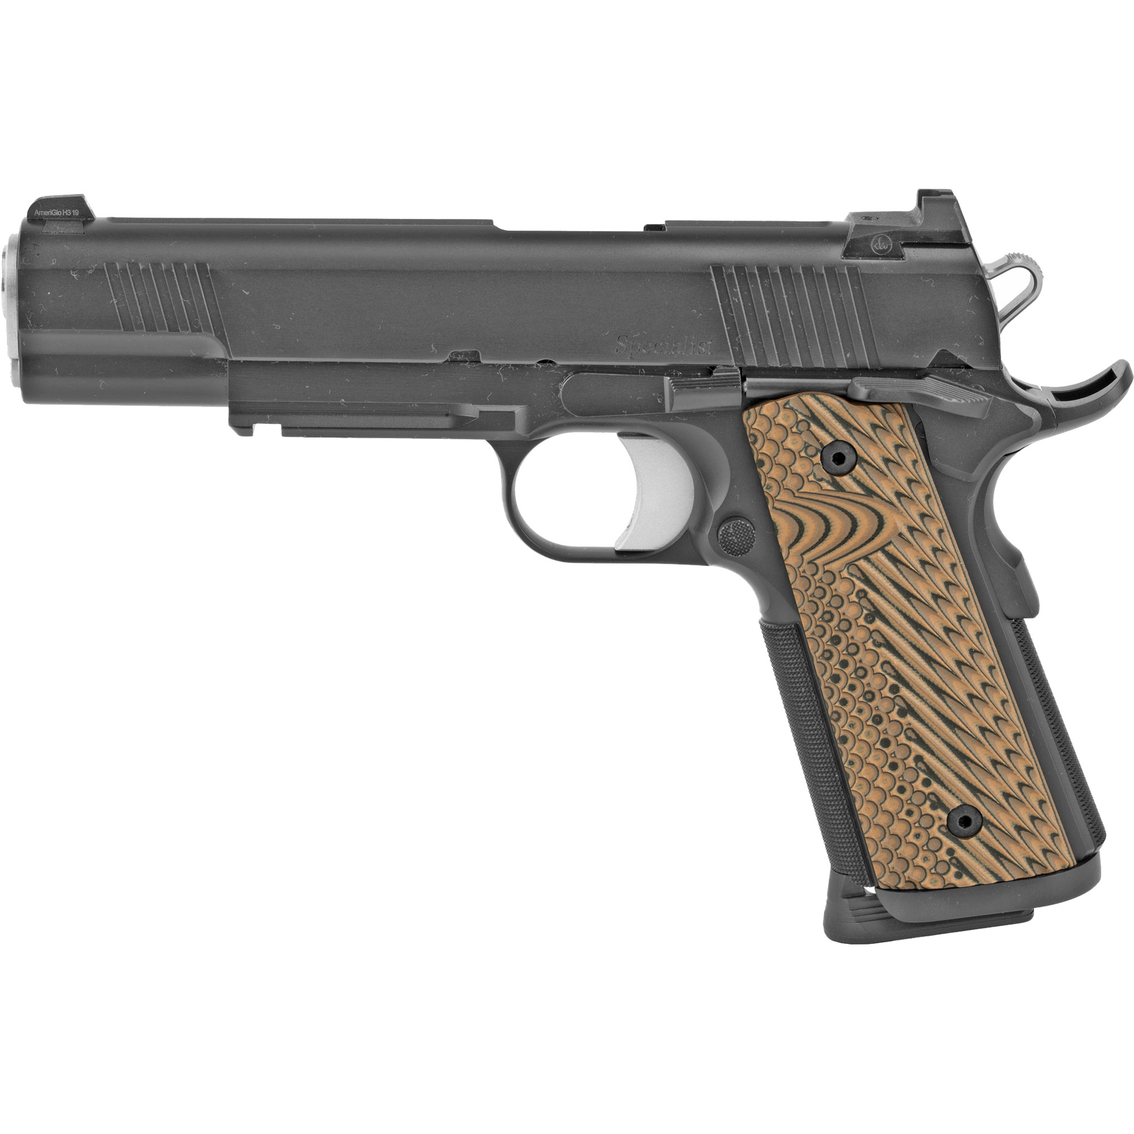 Dan Wesson 1911 Specialist 45 ACP 5 in. Barrel with Night Sights 8 Rnd Pistol STS - Image 2 of 3